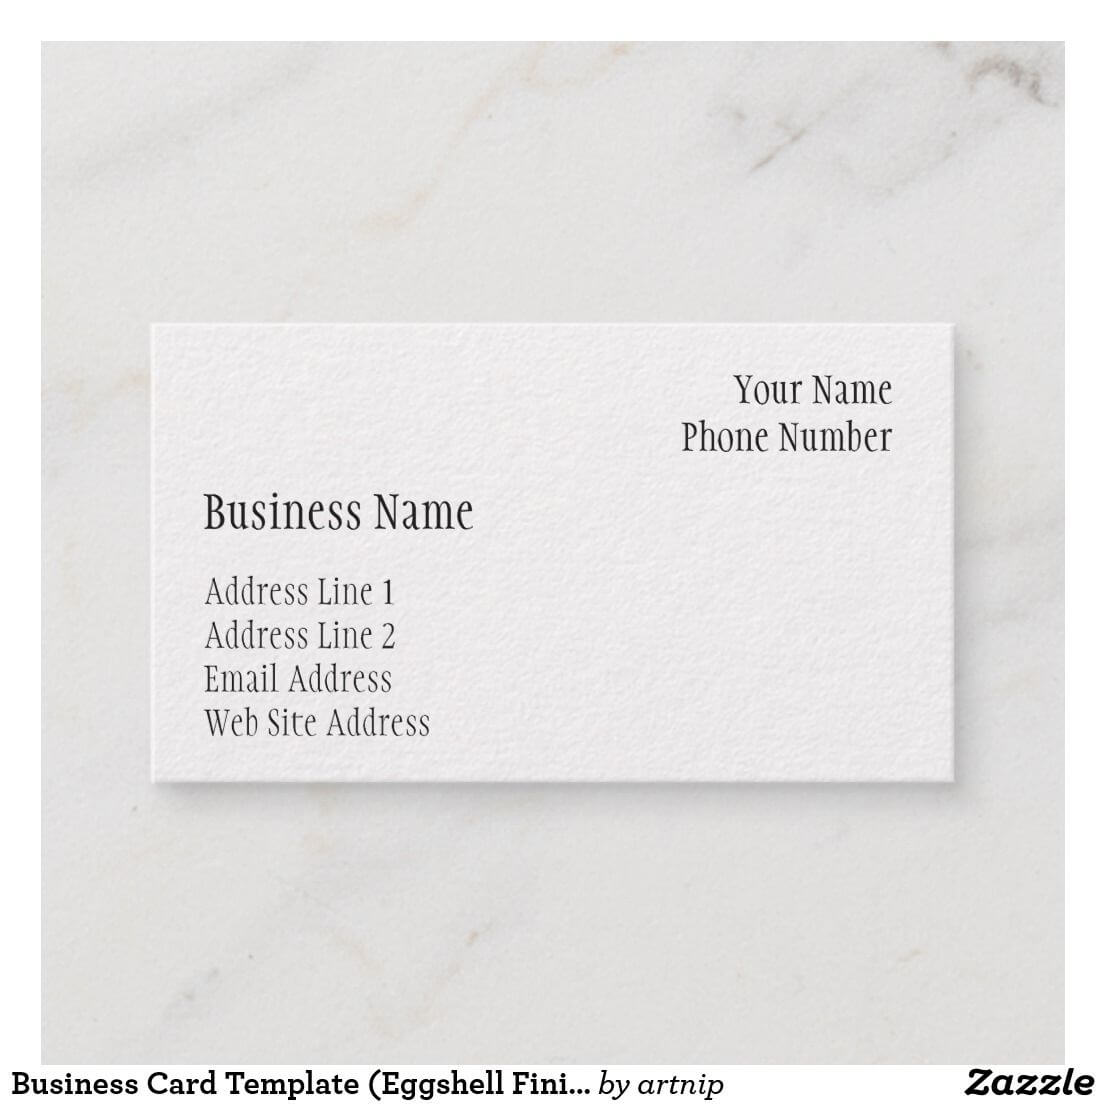 Business Card Template (Eggshell Finish) | Zazzle In Throughout Imprintable Place Cards Template